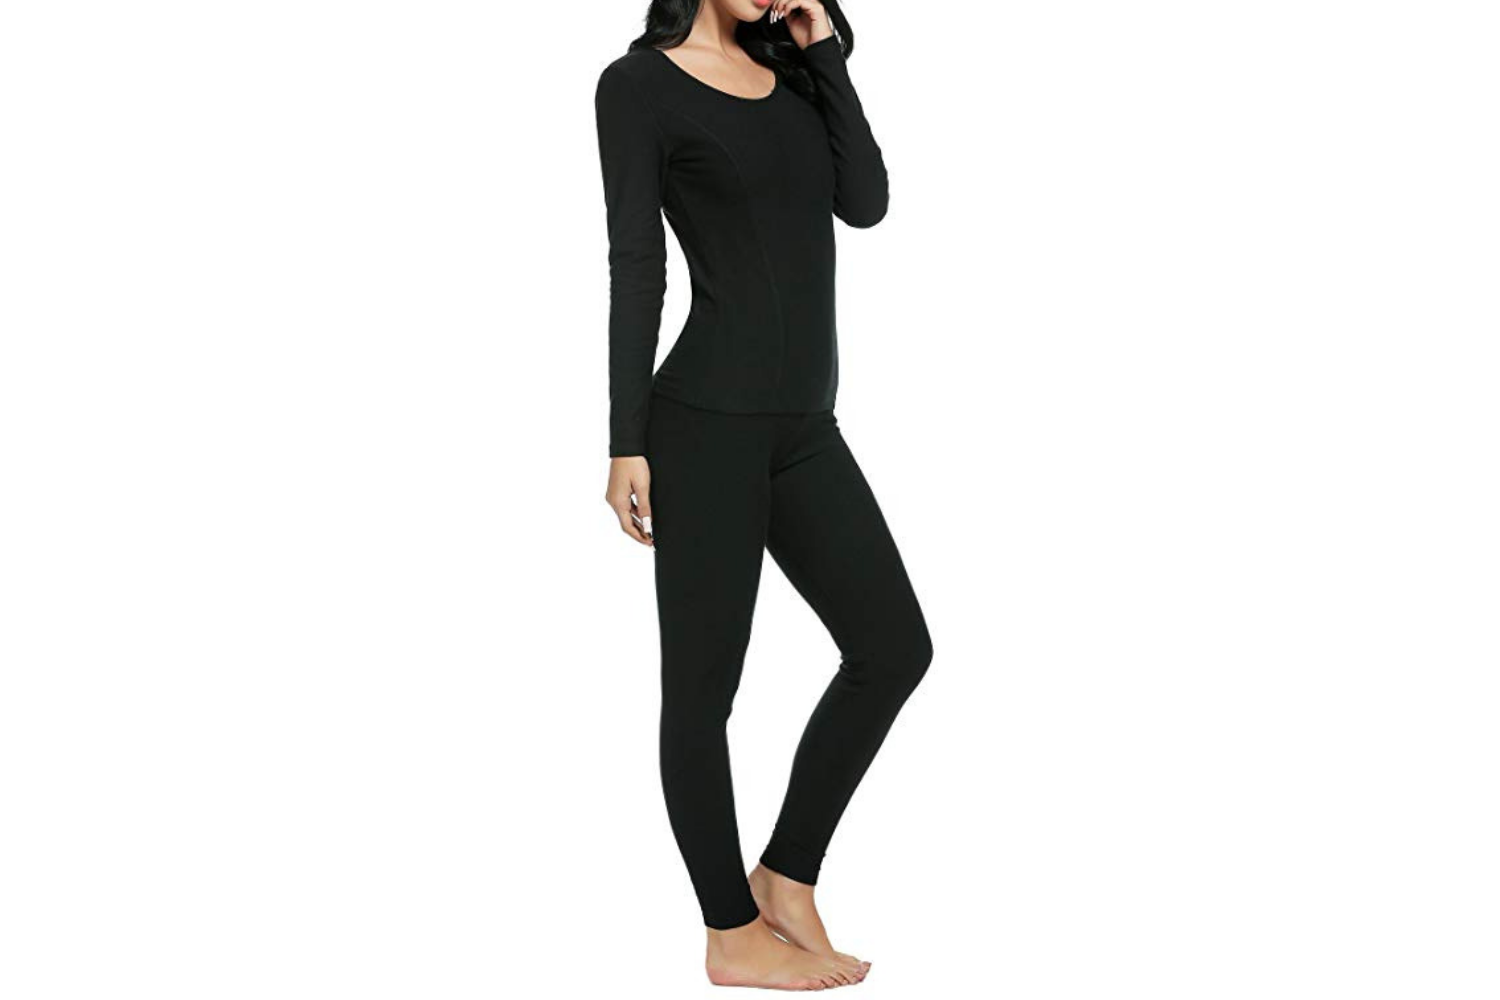 13 Best Winter Thermals to Keep You Warm in 2021 - Woman's World